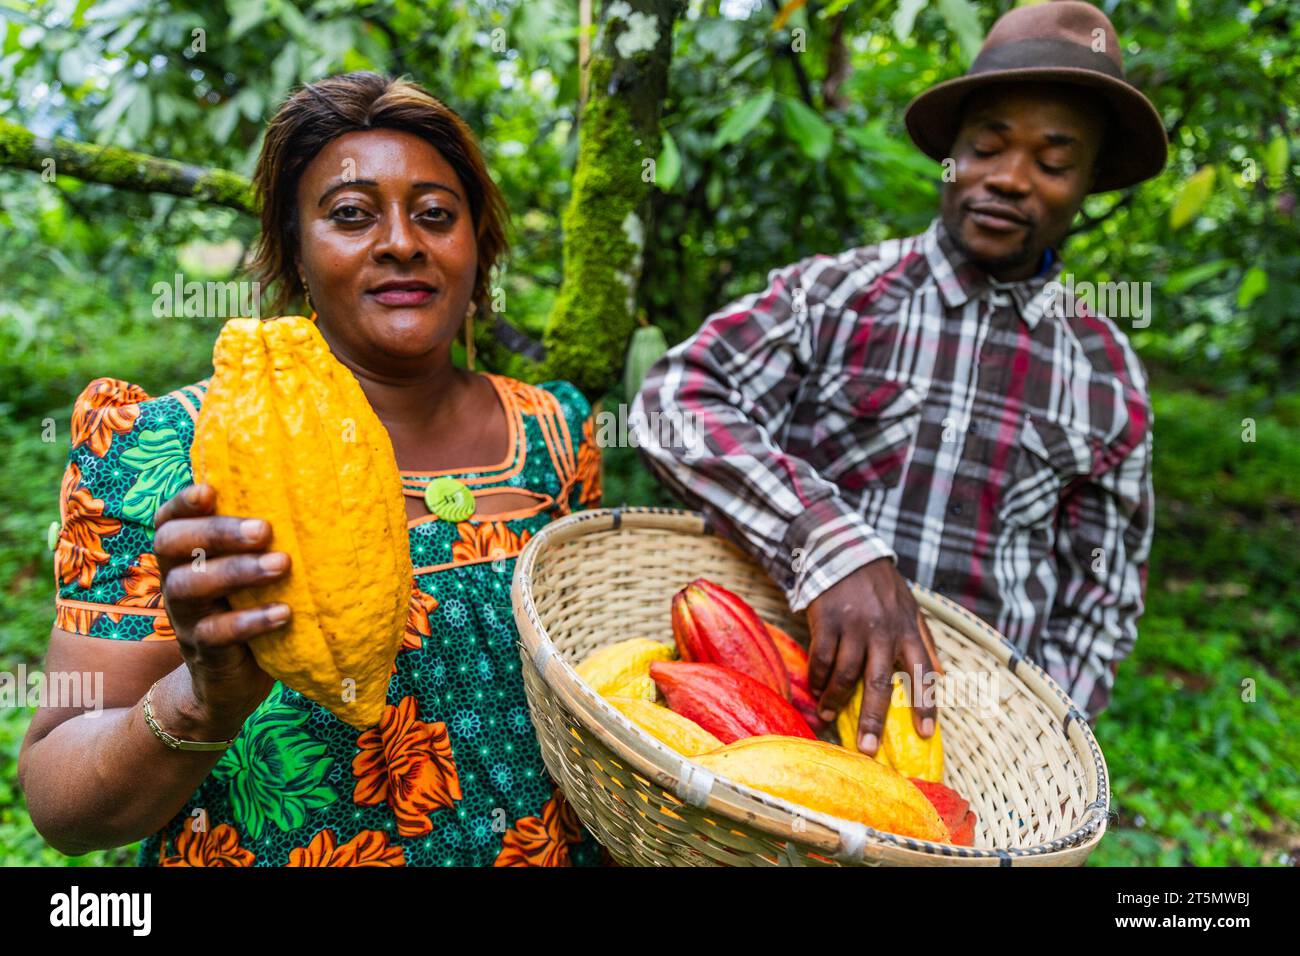 The two cocoa pickers exhibit the fruit of their harvest in a basket filled with cocoa pods. Stock Photo